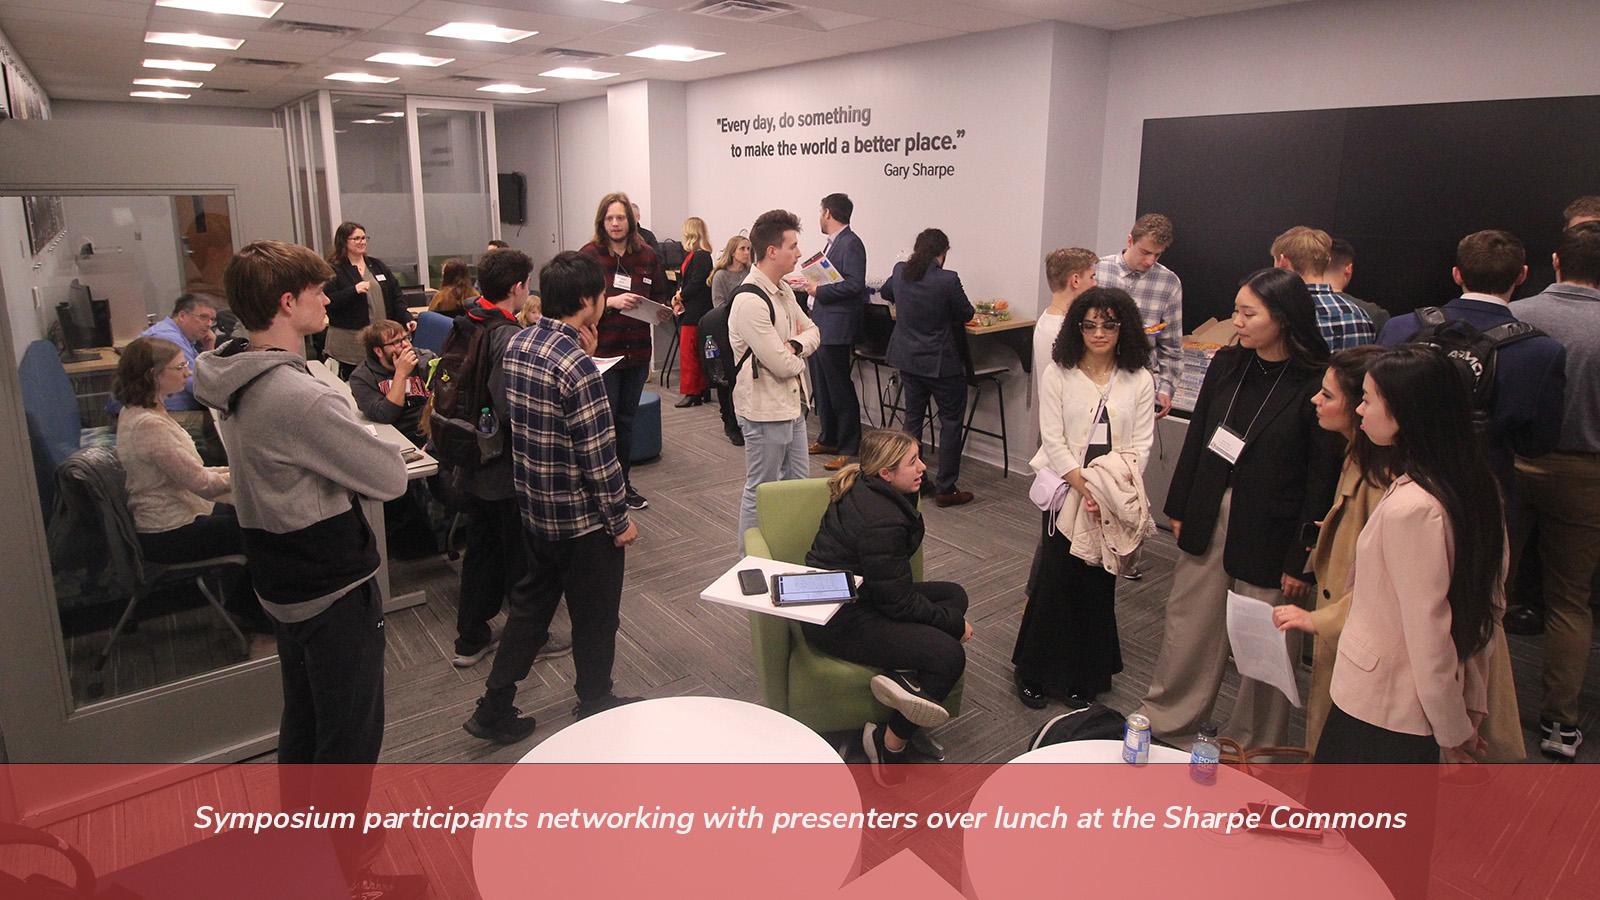 Symosium participants networking with presenters over lunch at the Sharpe Commons